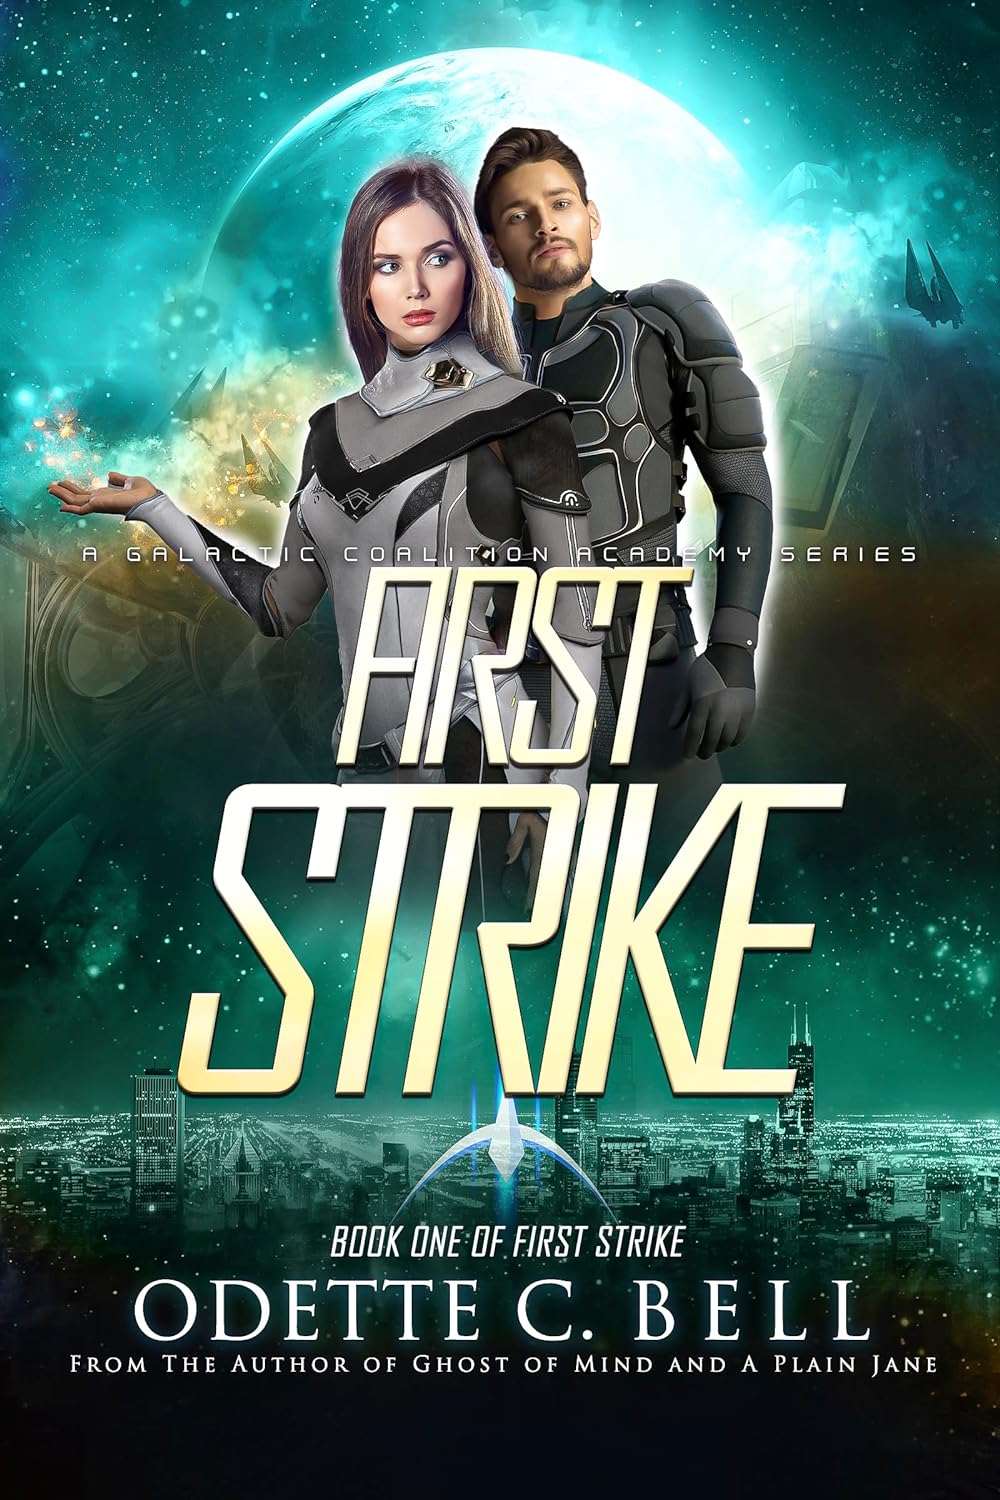 First Strike (Book One) is free on Amazon Kindle